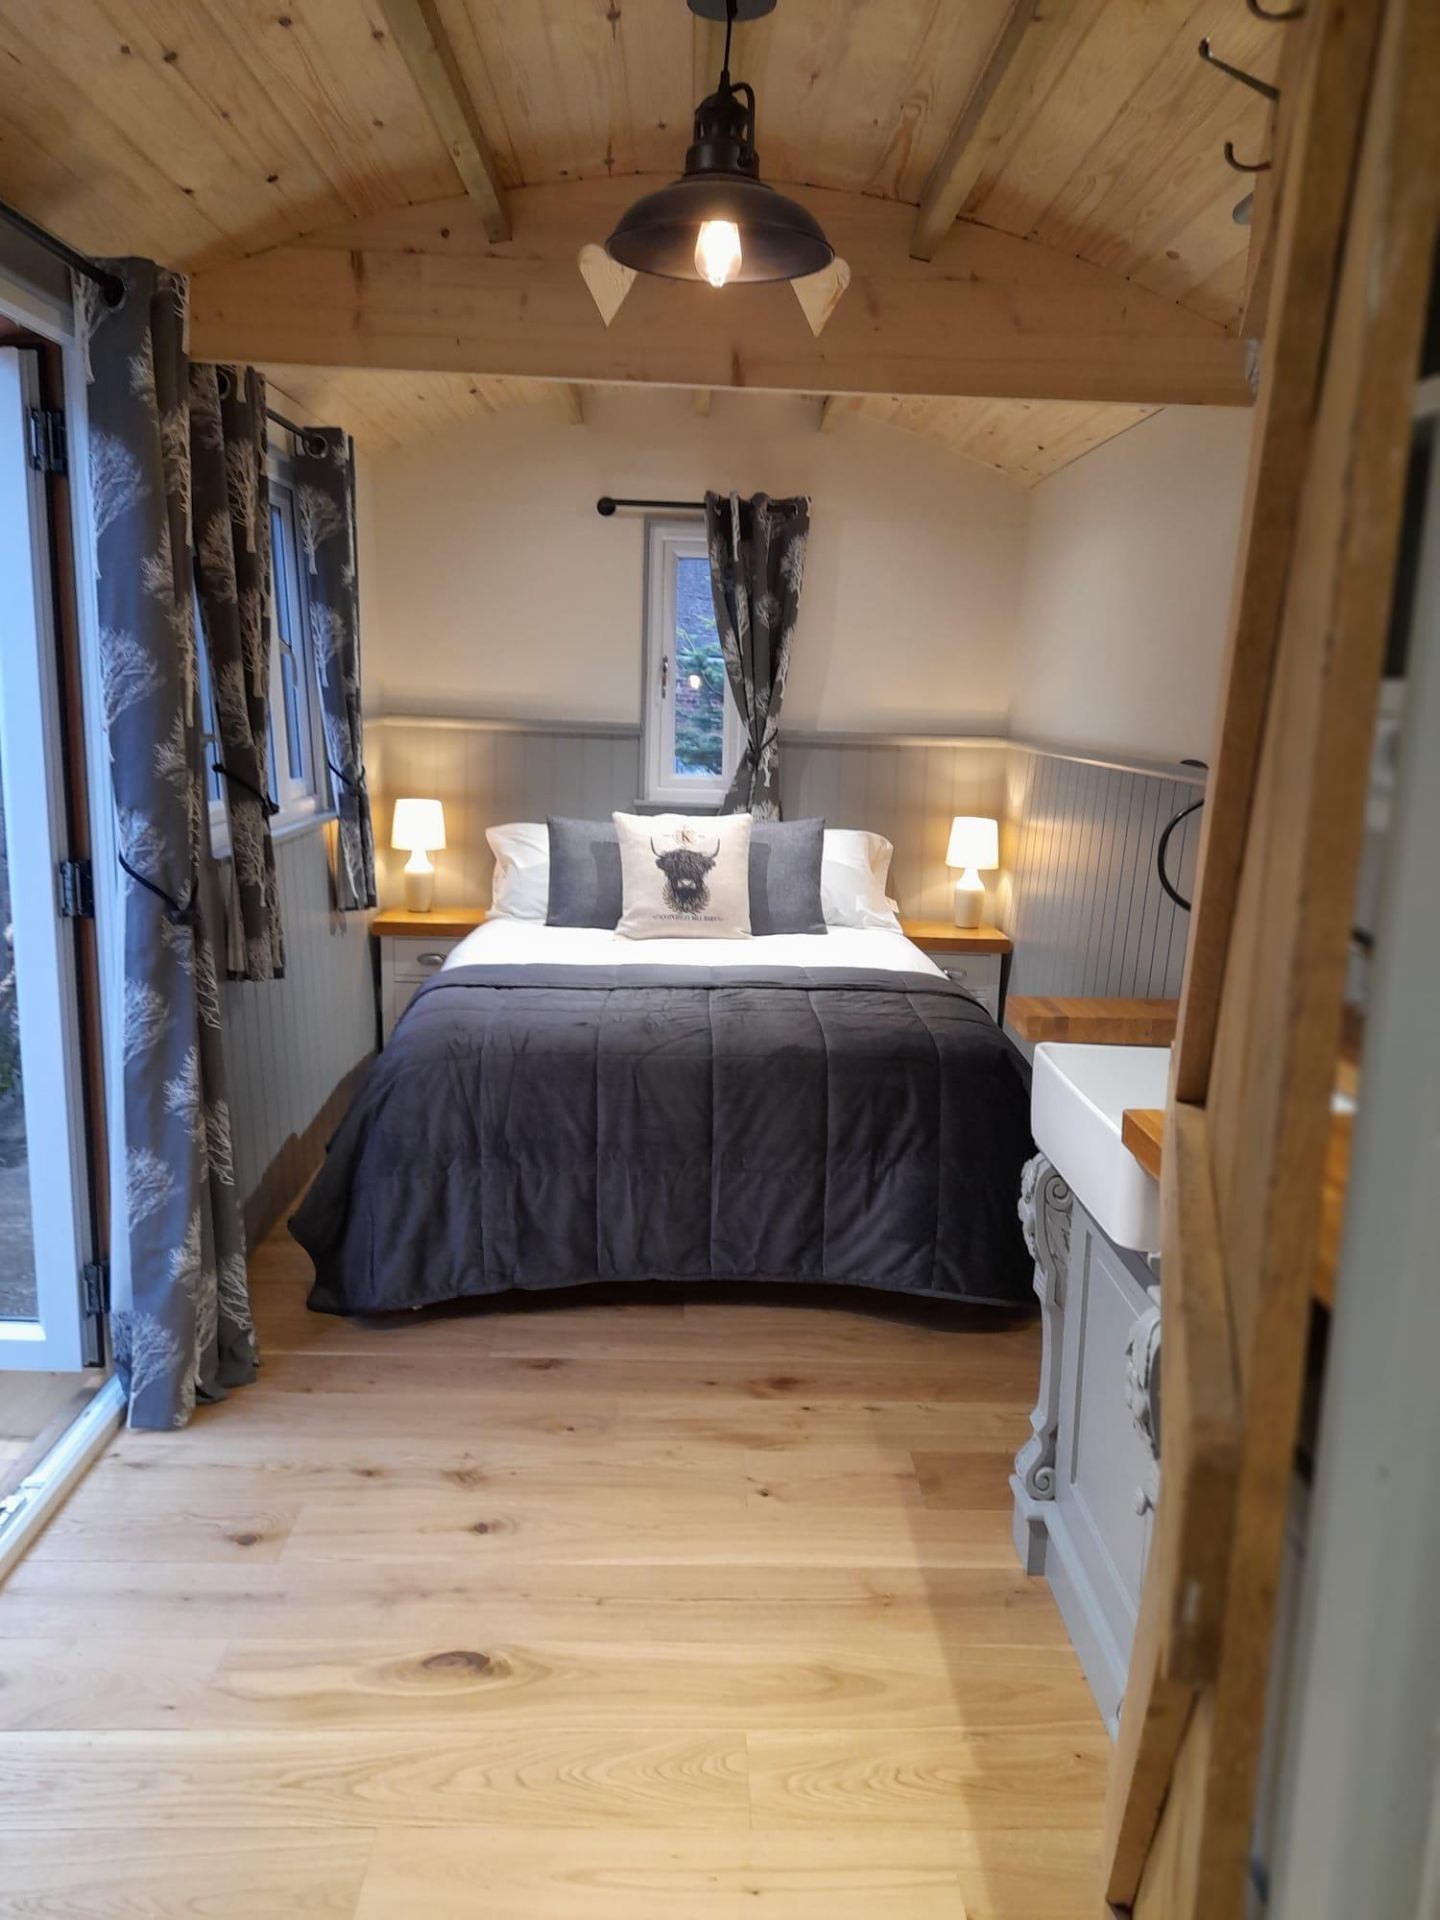 A SHEPHERDS HUT - LUXURIOUS NEW HAND CRAFTED, FULLY FINISHED BUILT FOR ALL YEAR ROUND USE HEAVILY - Image 5 of 13